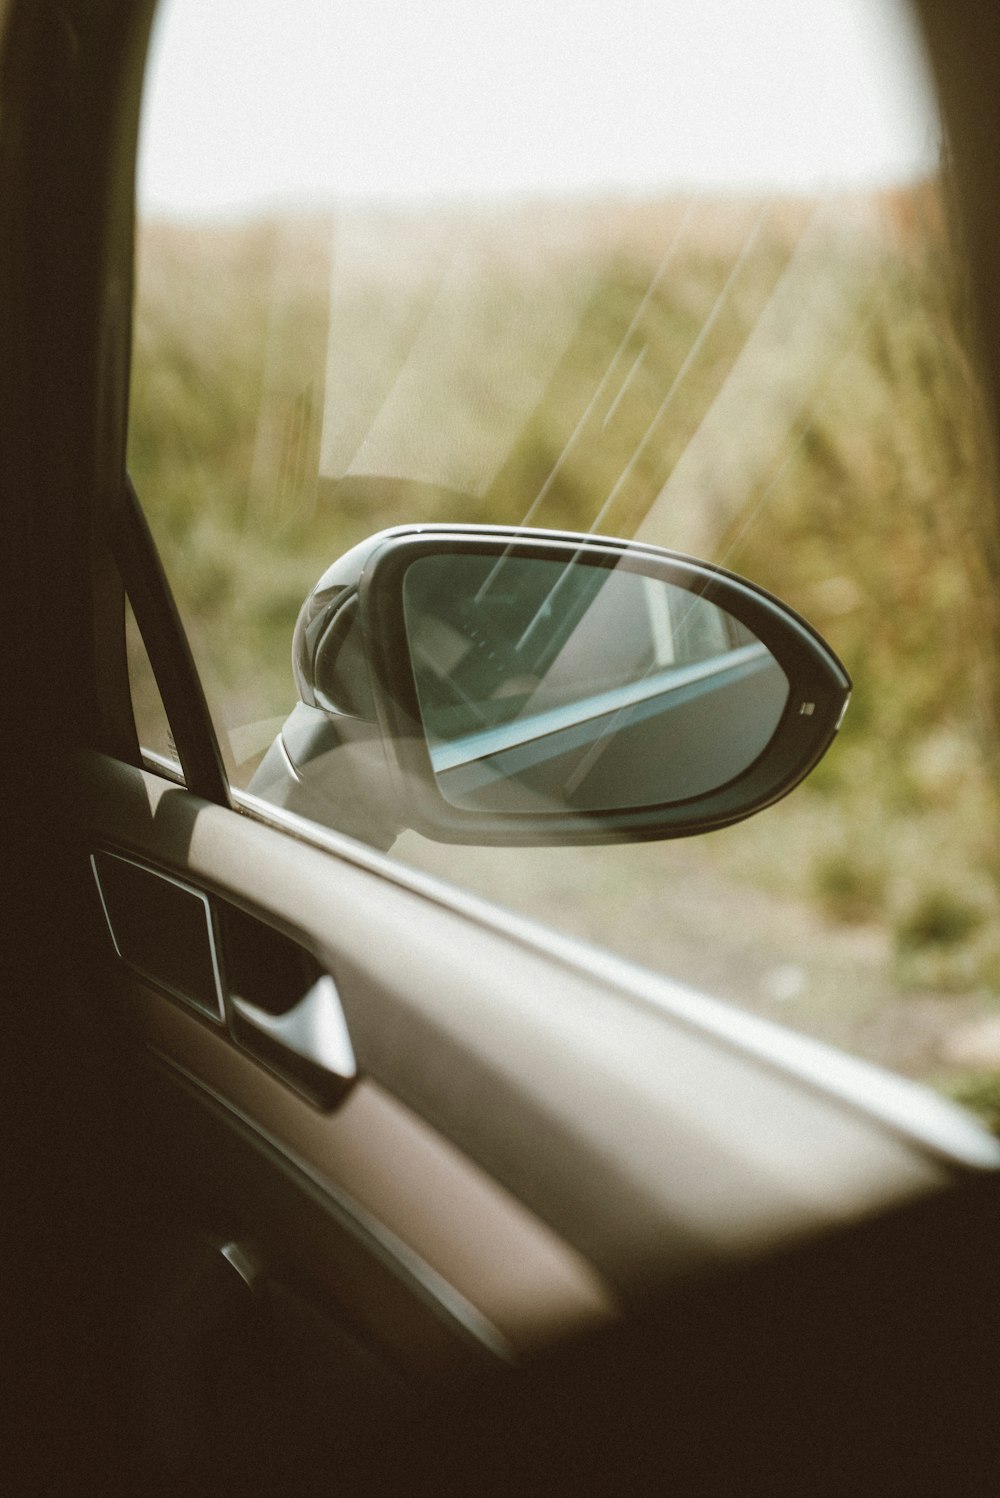 a car's side view mirror is shown in the side view mirror